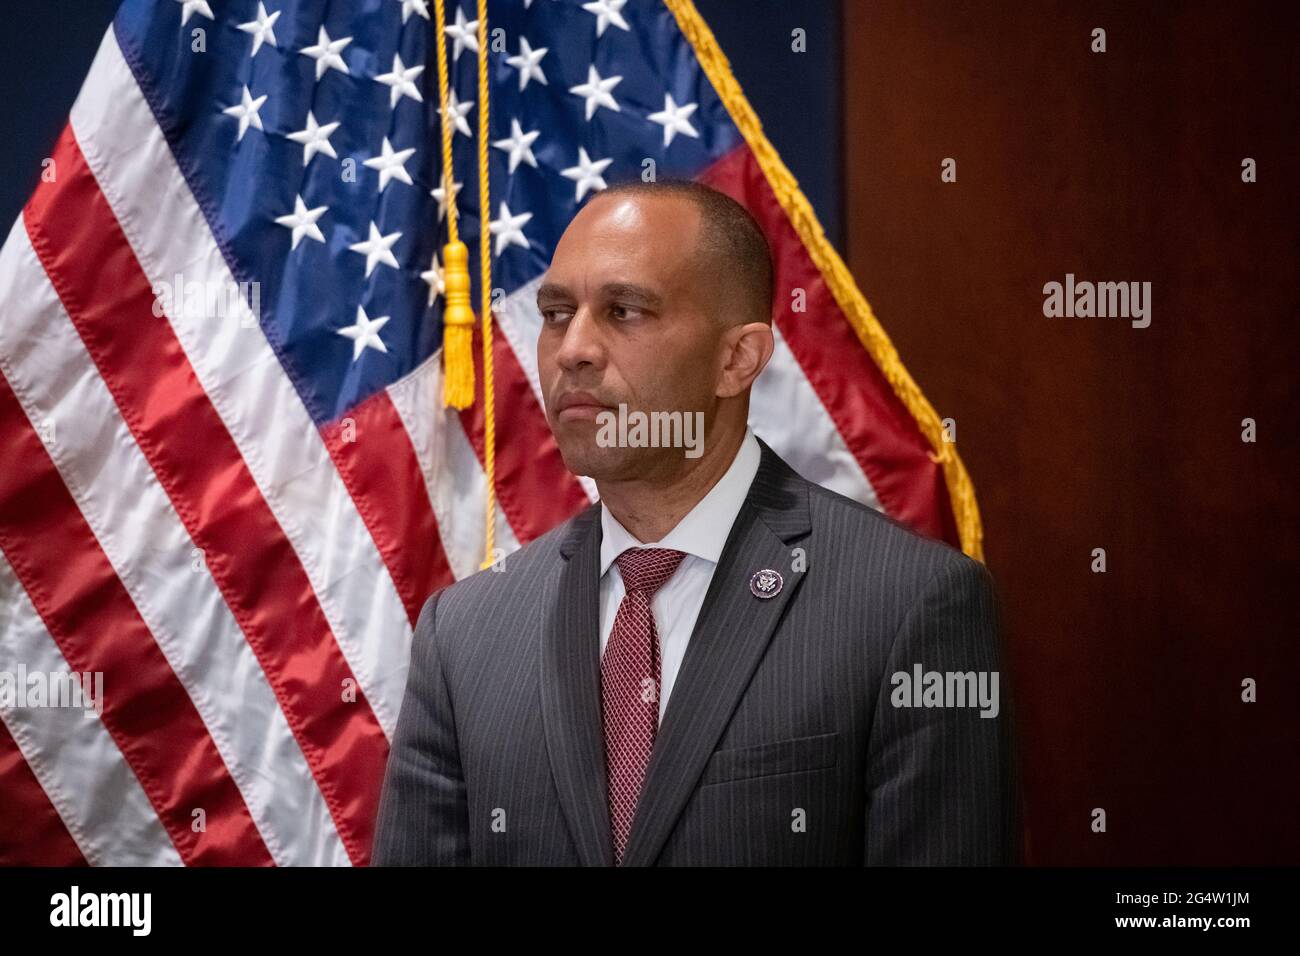 Washington, USA. 23rd June, 2021. Representative Hakeem Jeffries (D-NY) during a House Democrat Conference press Conference, at the U.S. Capitol, in Washington, DC, on Wednesday, June 23, 2021. Last night Senate Republicans filibustered a voting rights bill as bipartisan negotiations over infrastructure legislation grind on with little apparent progress building a package to beat the 60-vote filibuster threshold. (Graeme Sloan/Sipa USA) Credit: Sipa USA/Alamy Live News Stock Photo